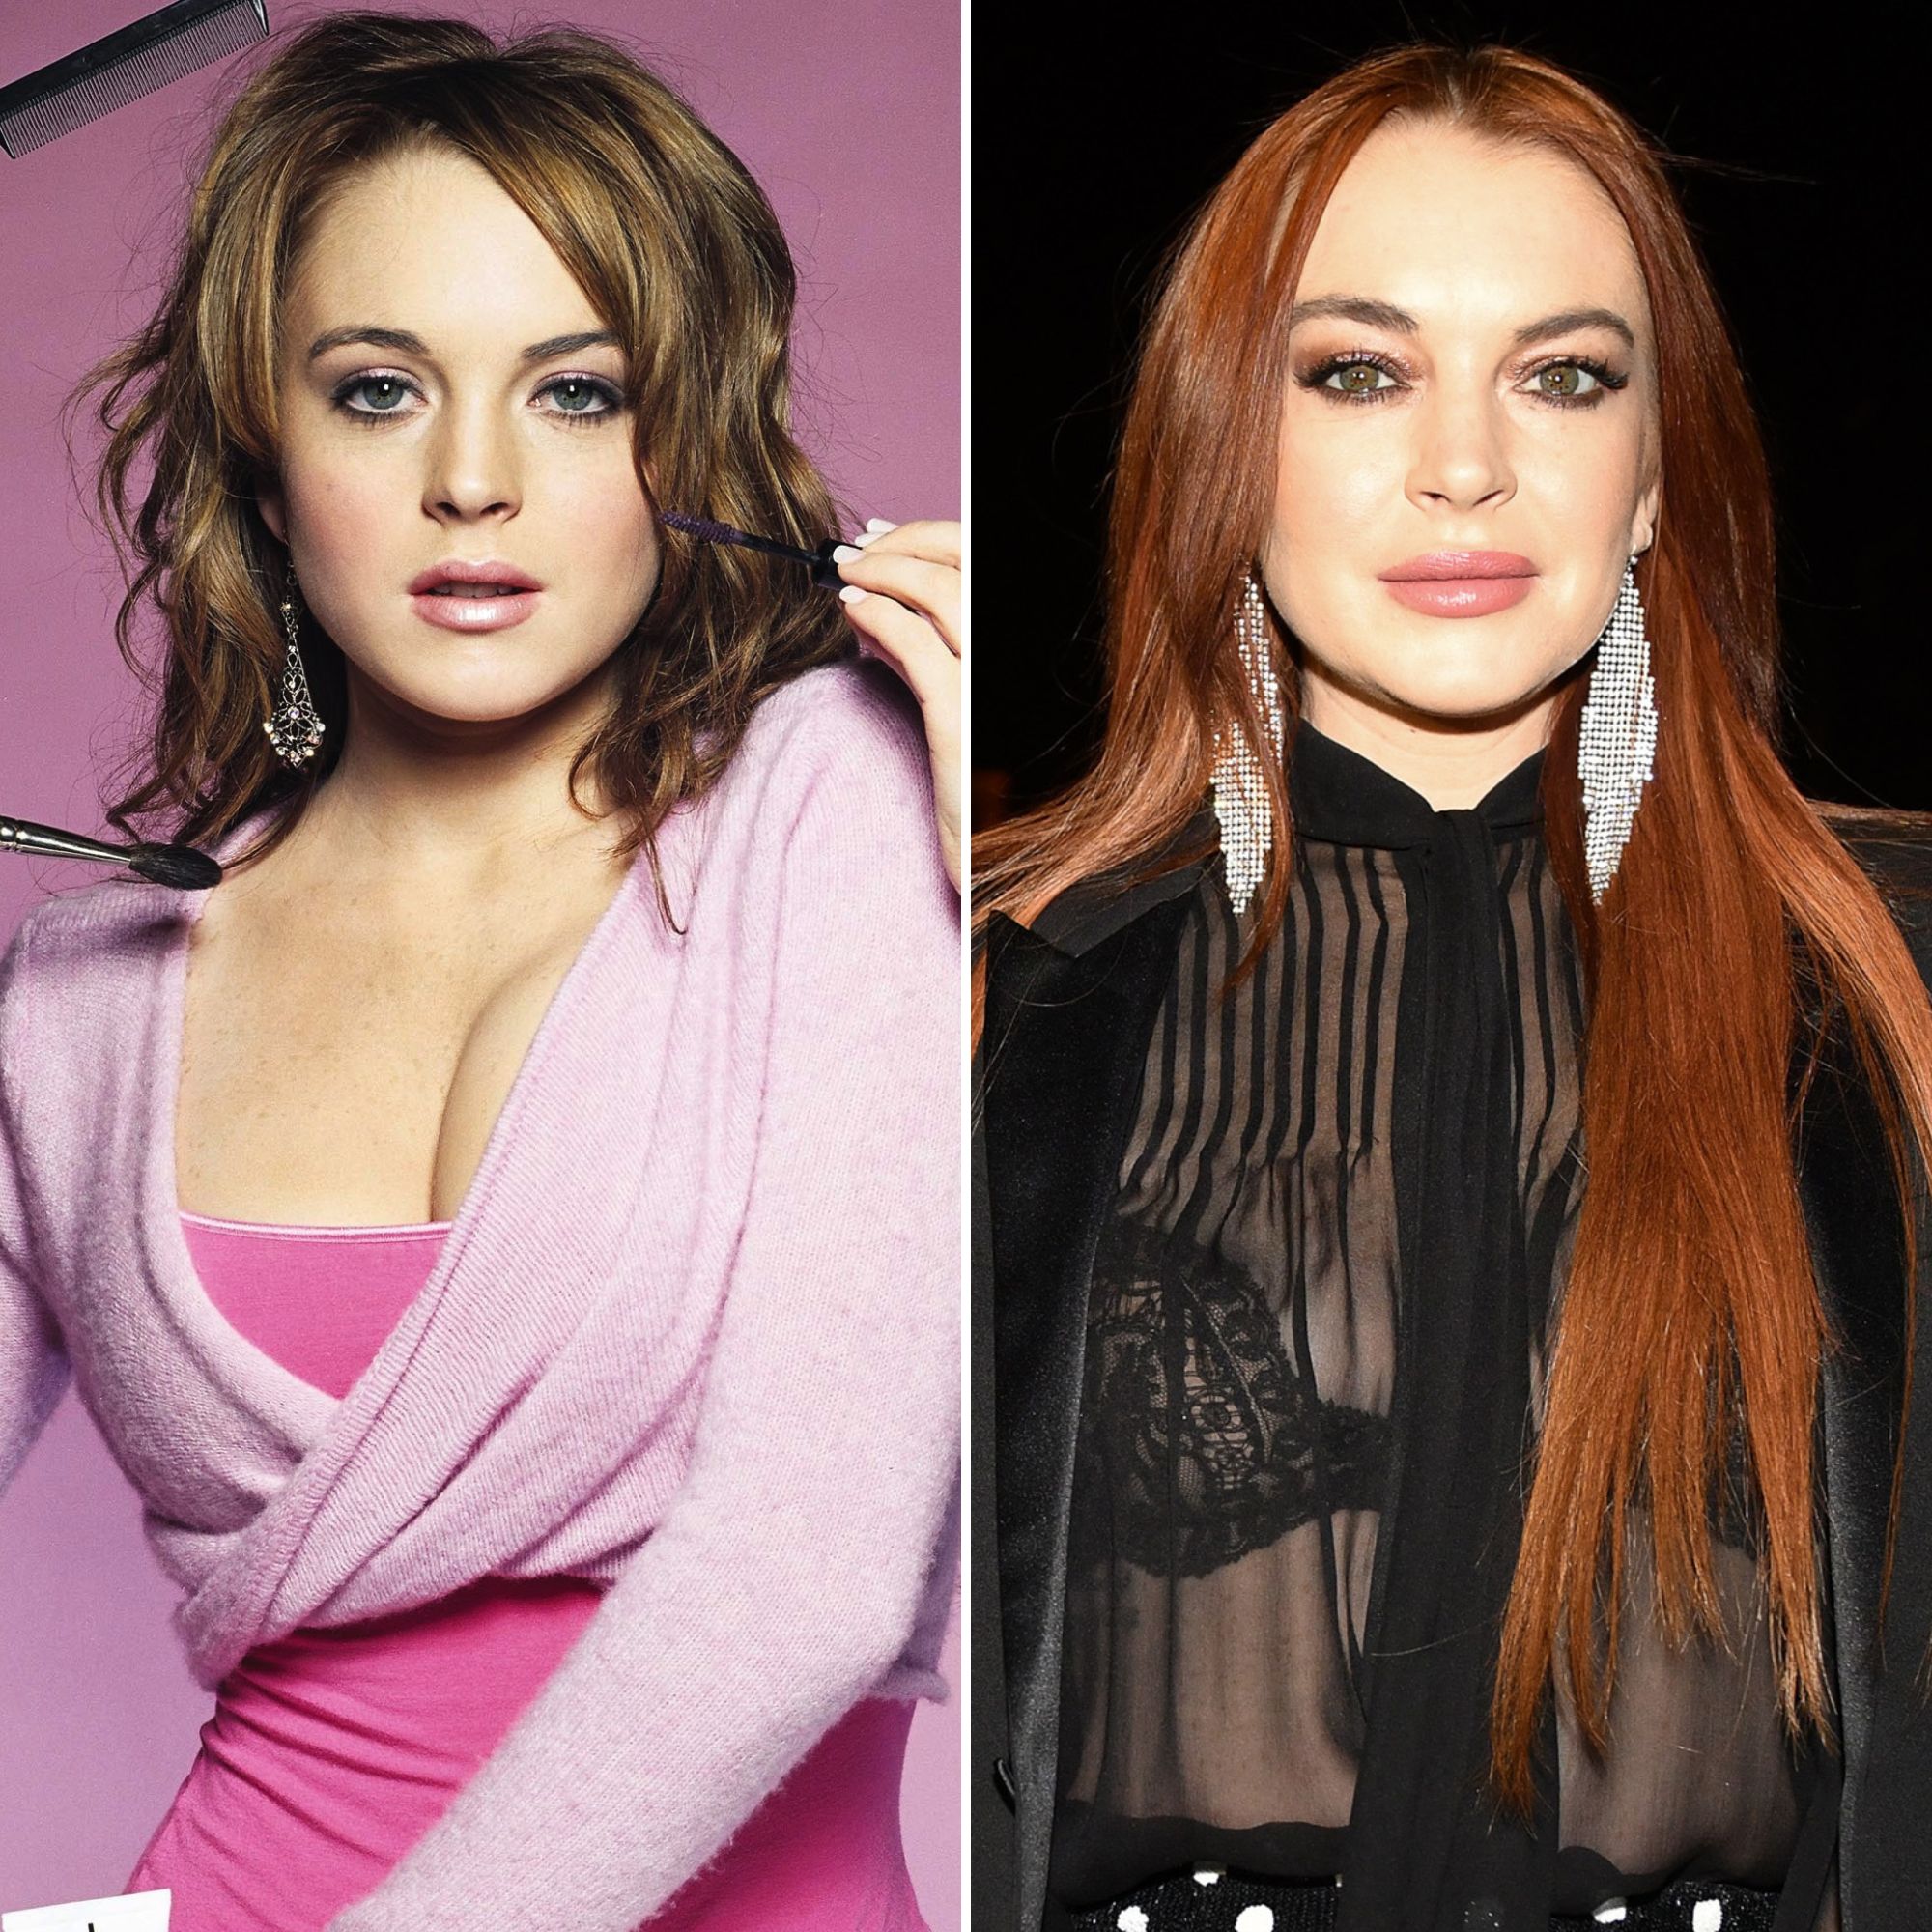 Lindsay Lohan Looks Back at Some of Her Most Iconic Early Movie Looks